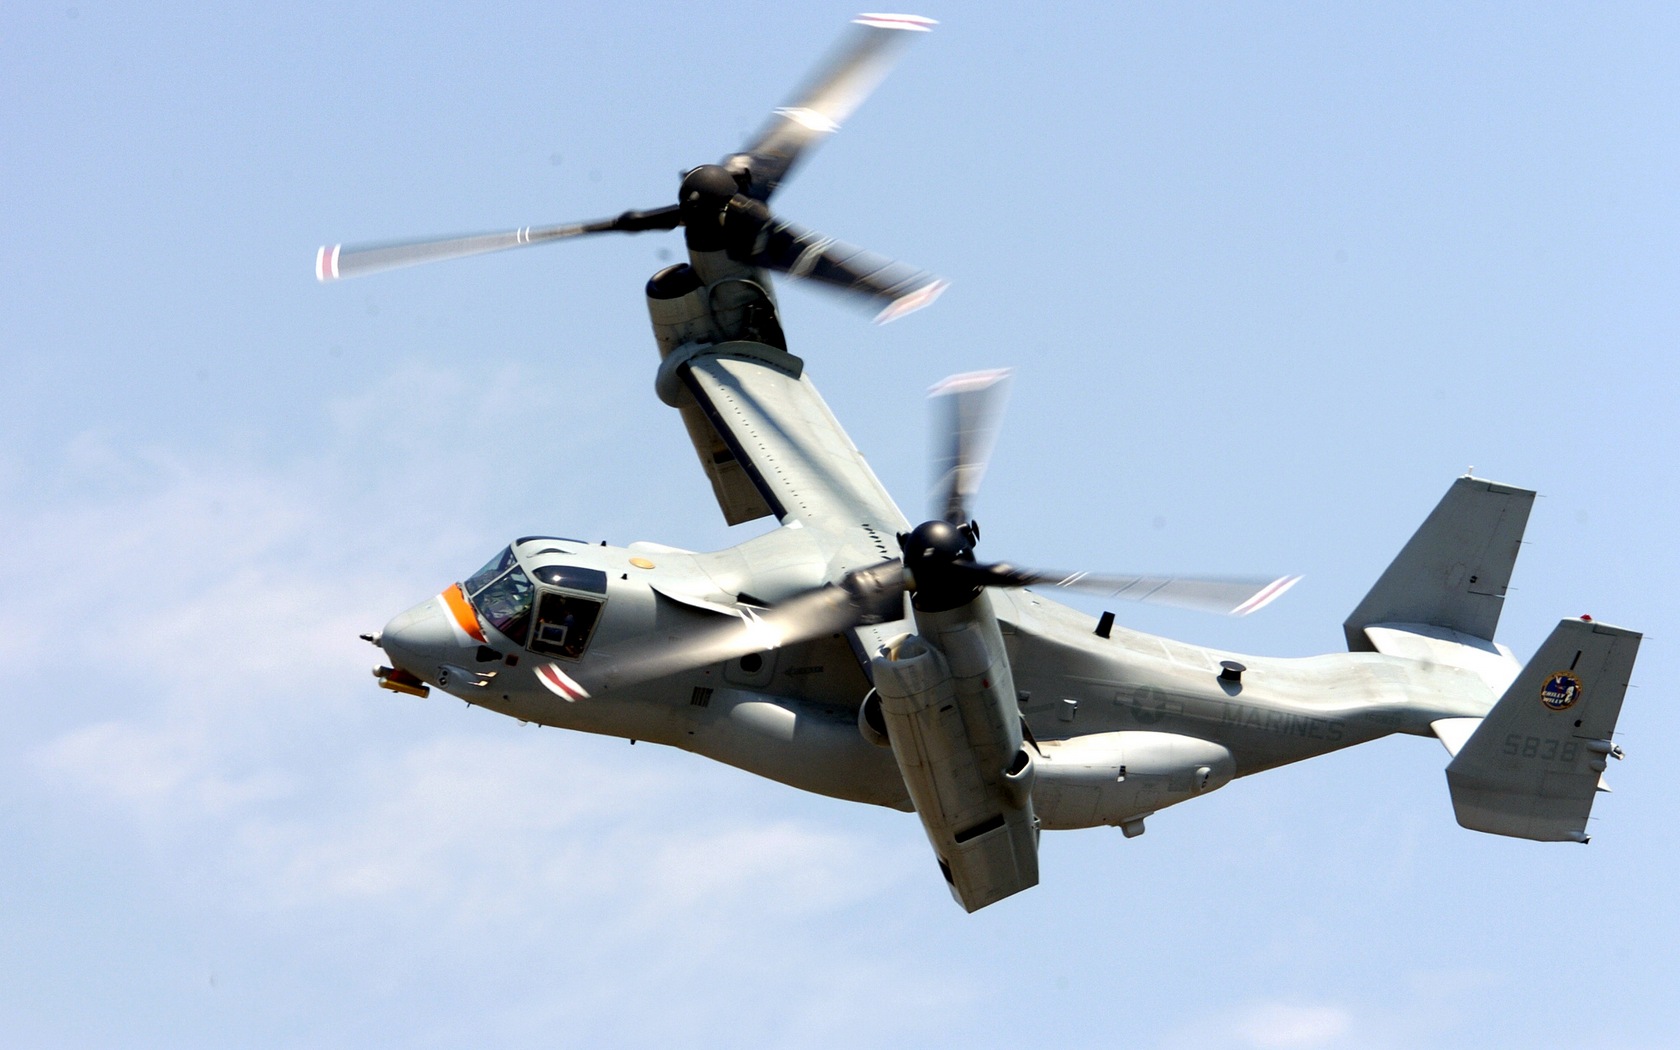 Download full size MV-22 Osprey Helicopter wallpaper / 1680x1050